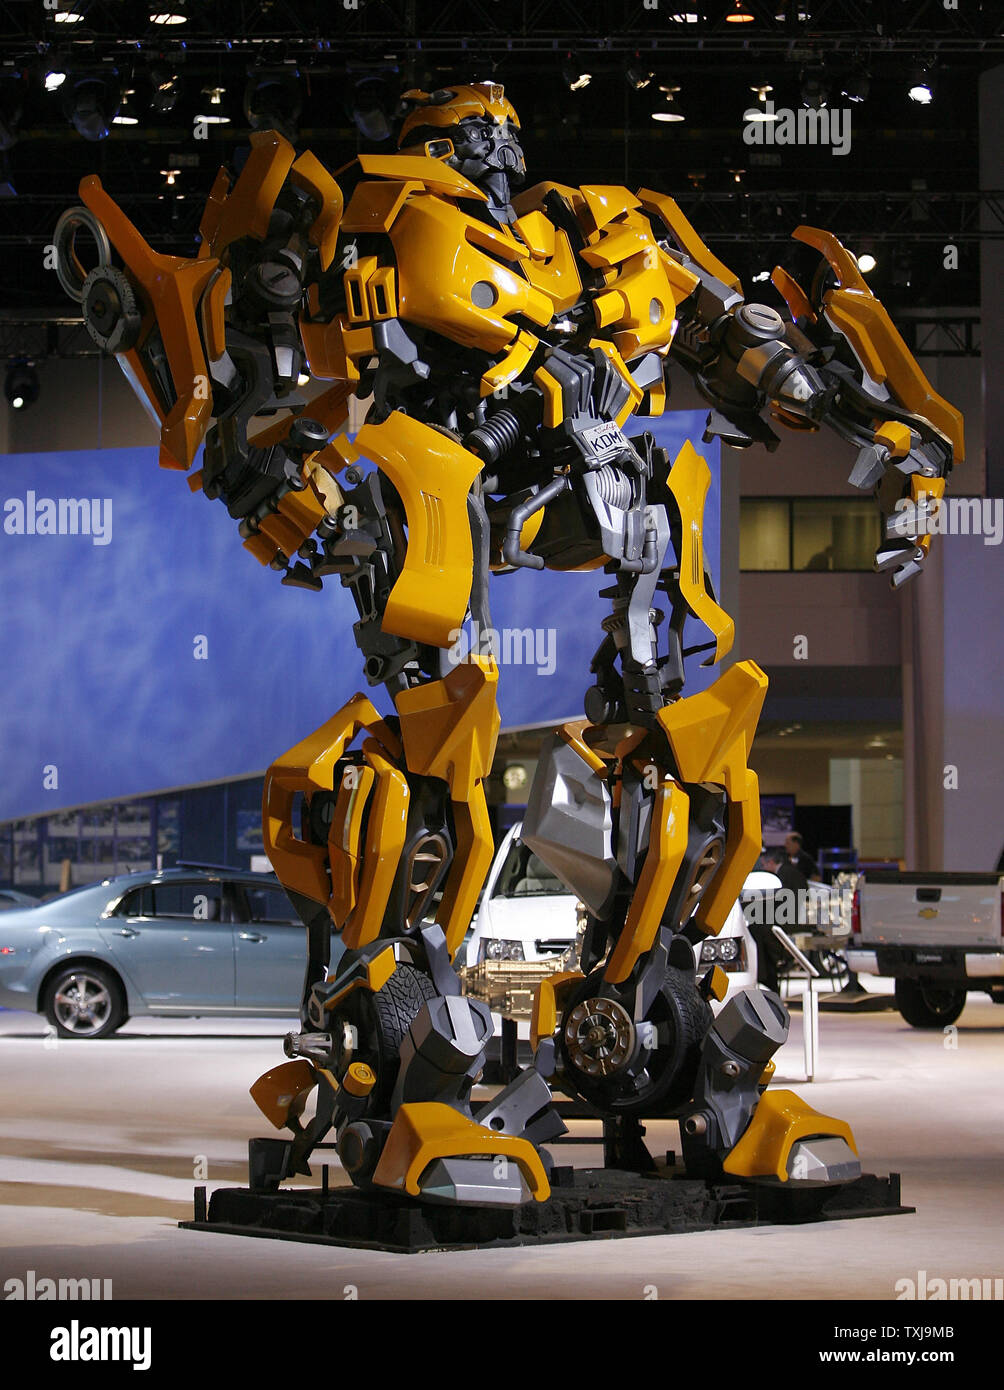 A model of the robot Bumblebee from the movie "Transformers" is displayed  at the General Motors area at the 2009 Chicago Auto Show at McCormick Place  in Chicago on February 11, 2009.